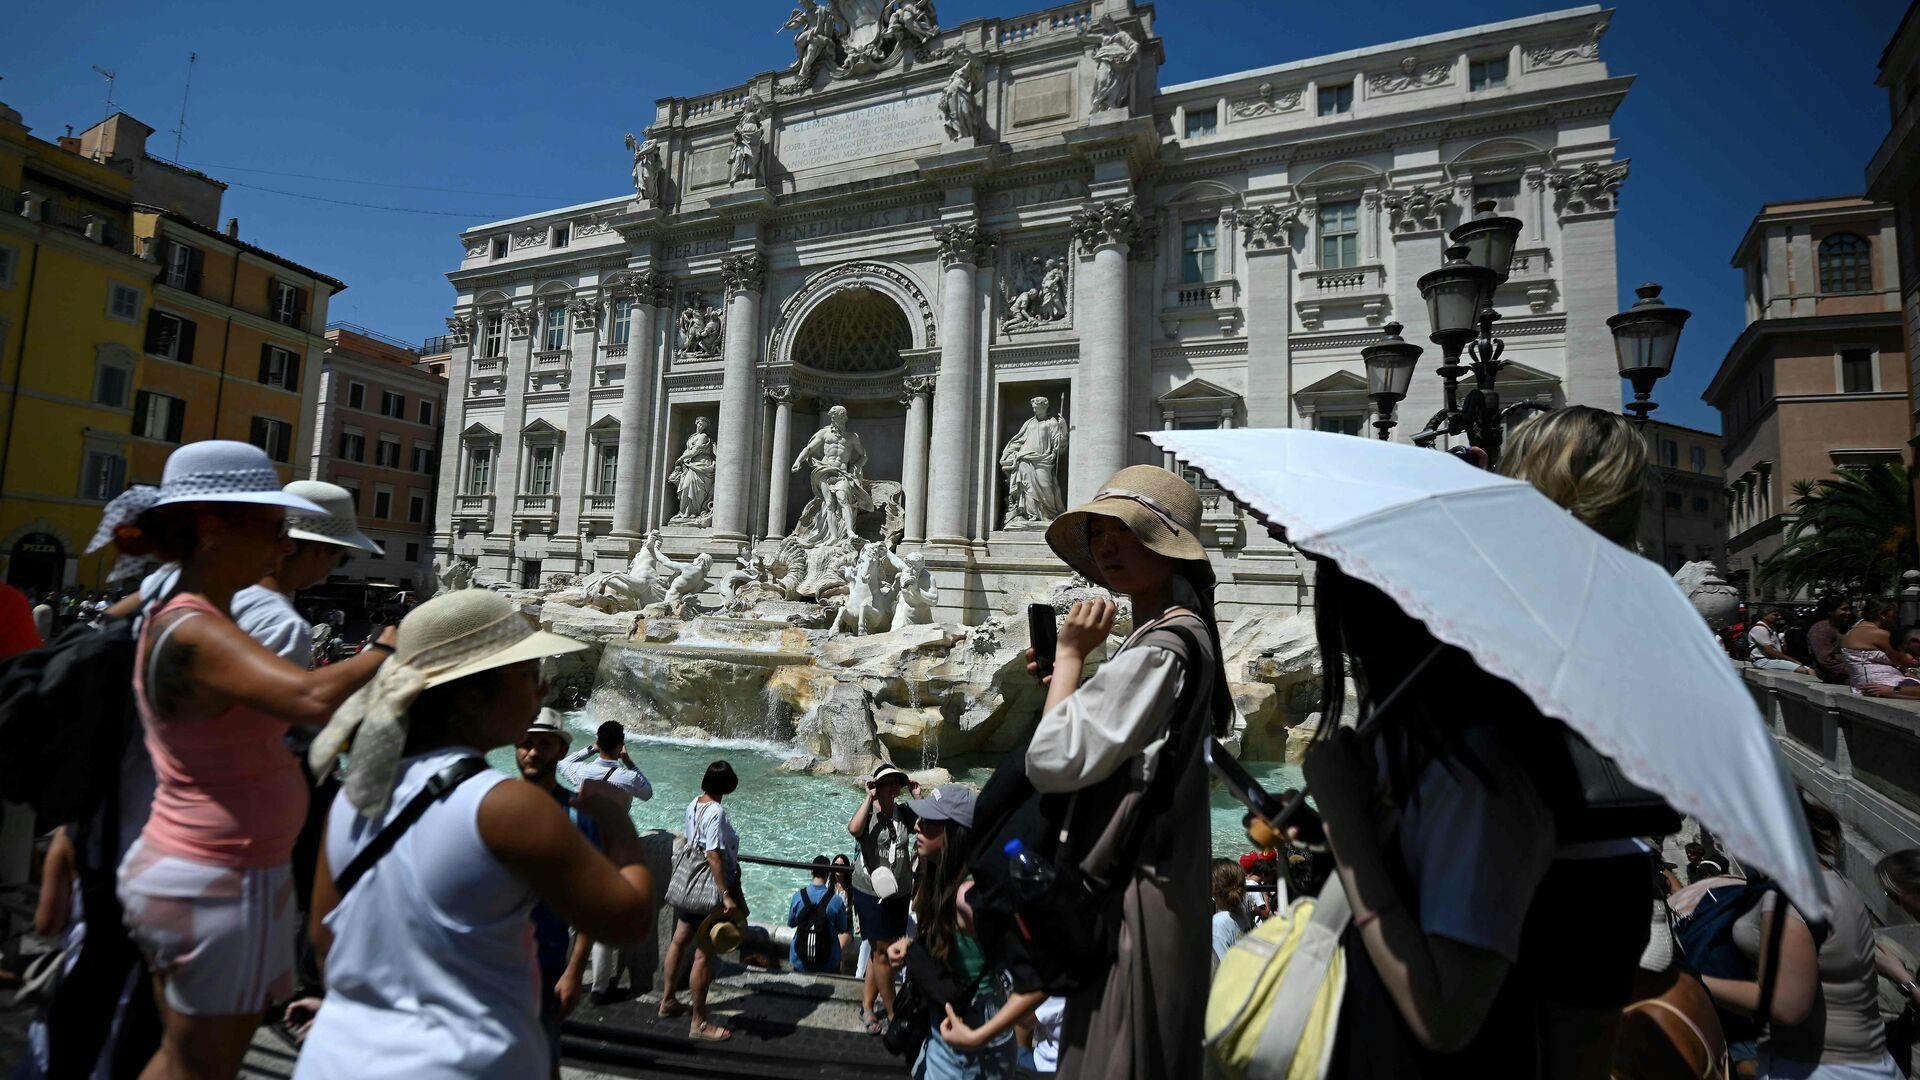 Tourist protect themselves with hats and umbrella at the Trevi Fountain during a heatwave in Rome on August 21 2023. (Photo by Filippo MONTEFORTE / AFP)